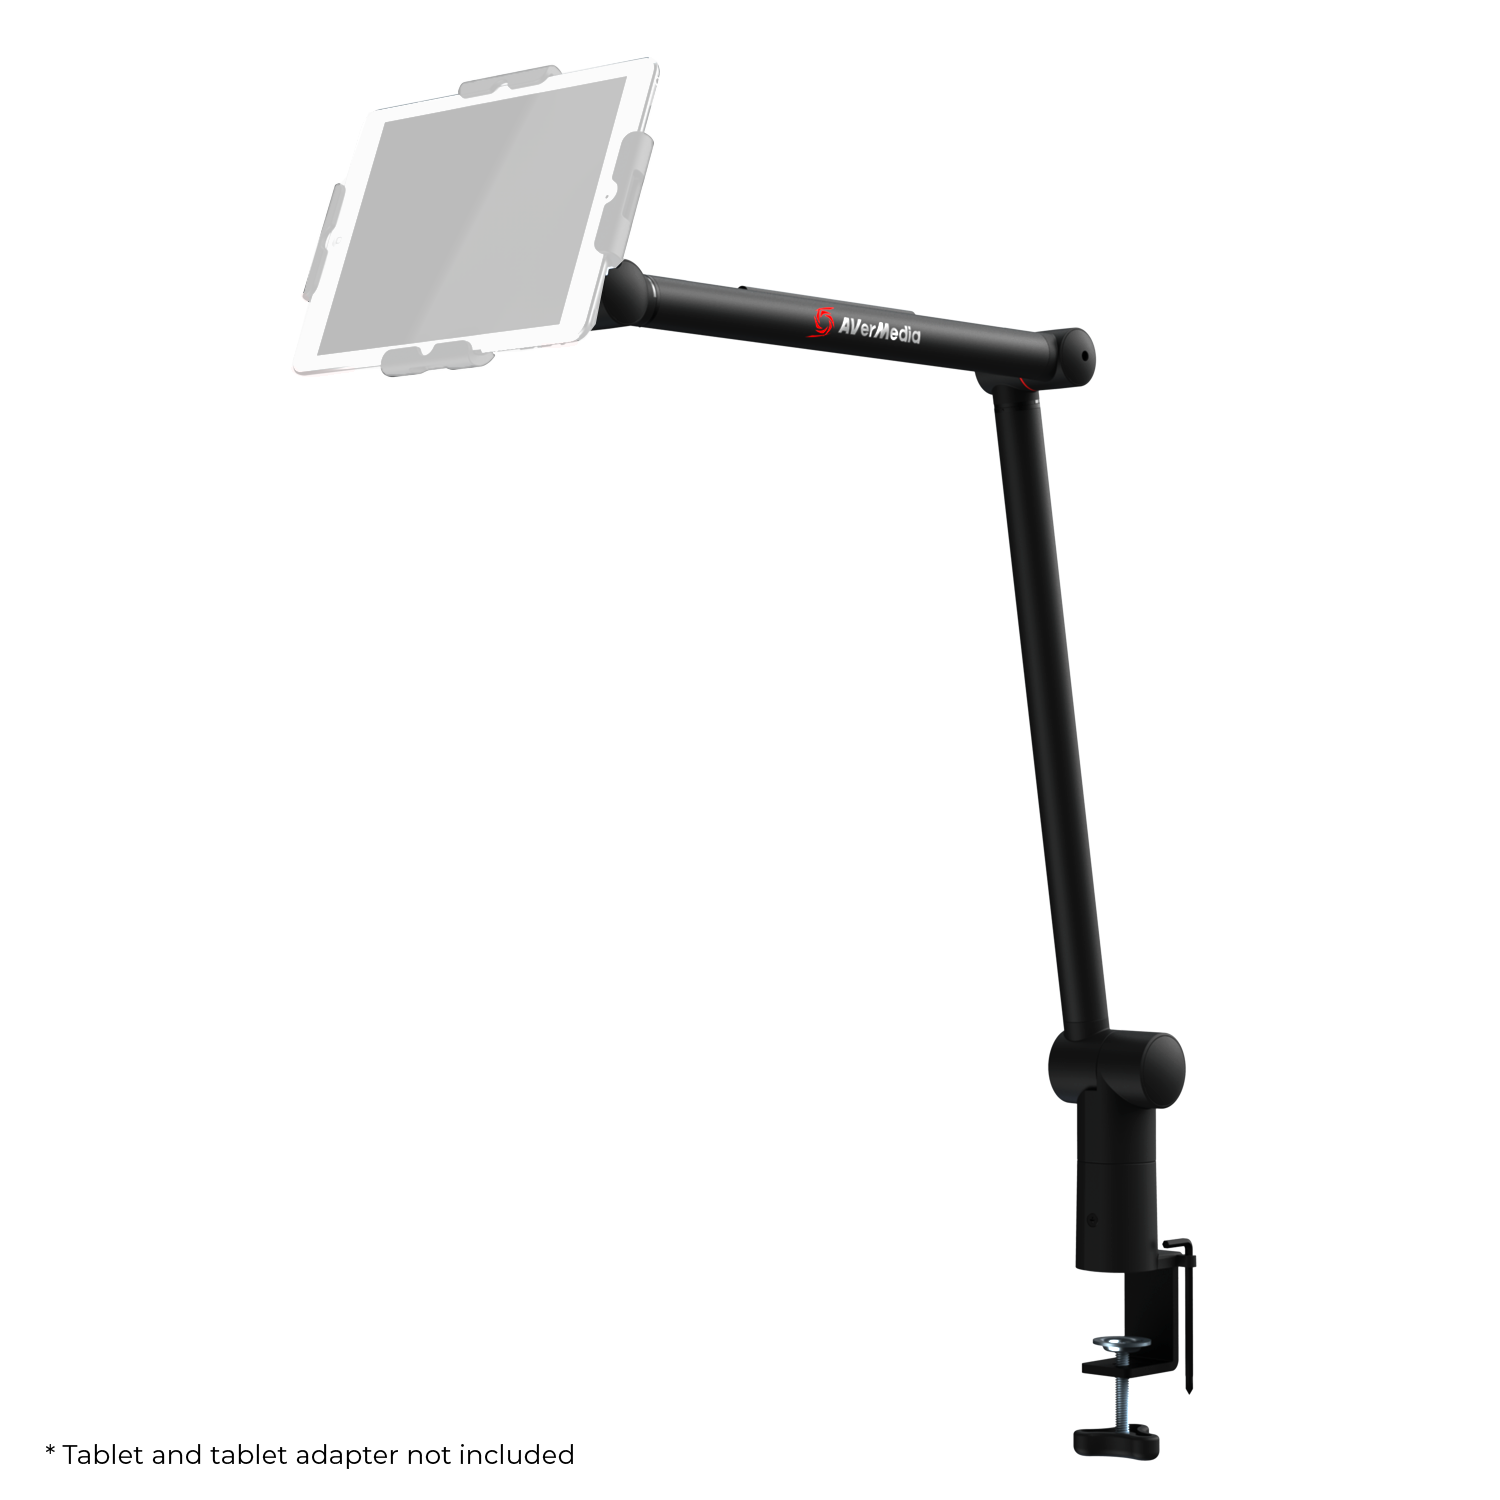 BA311 Adjustable Microphone Boom Arm for Live Streaming | AVerMedia